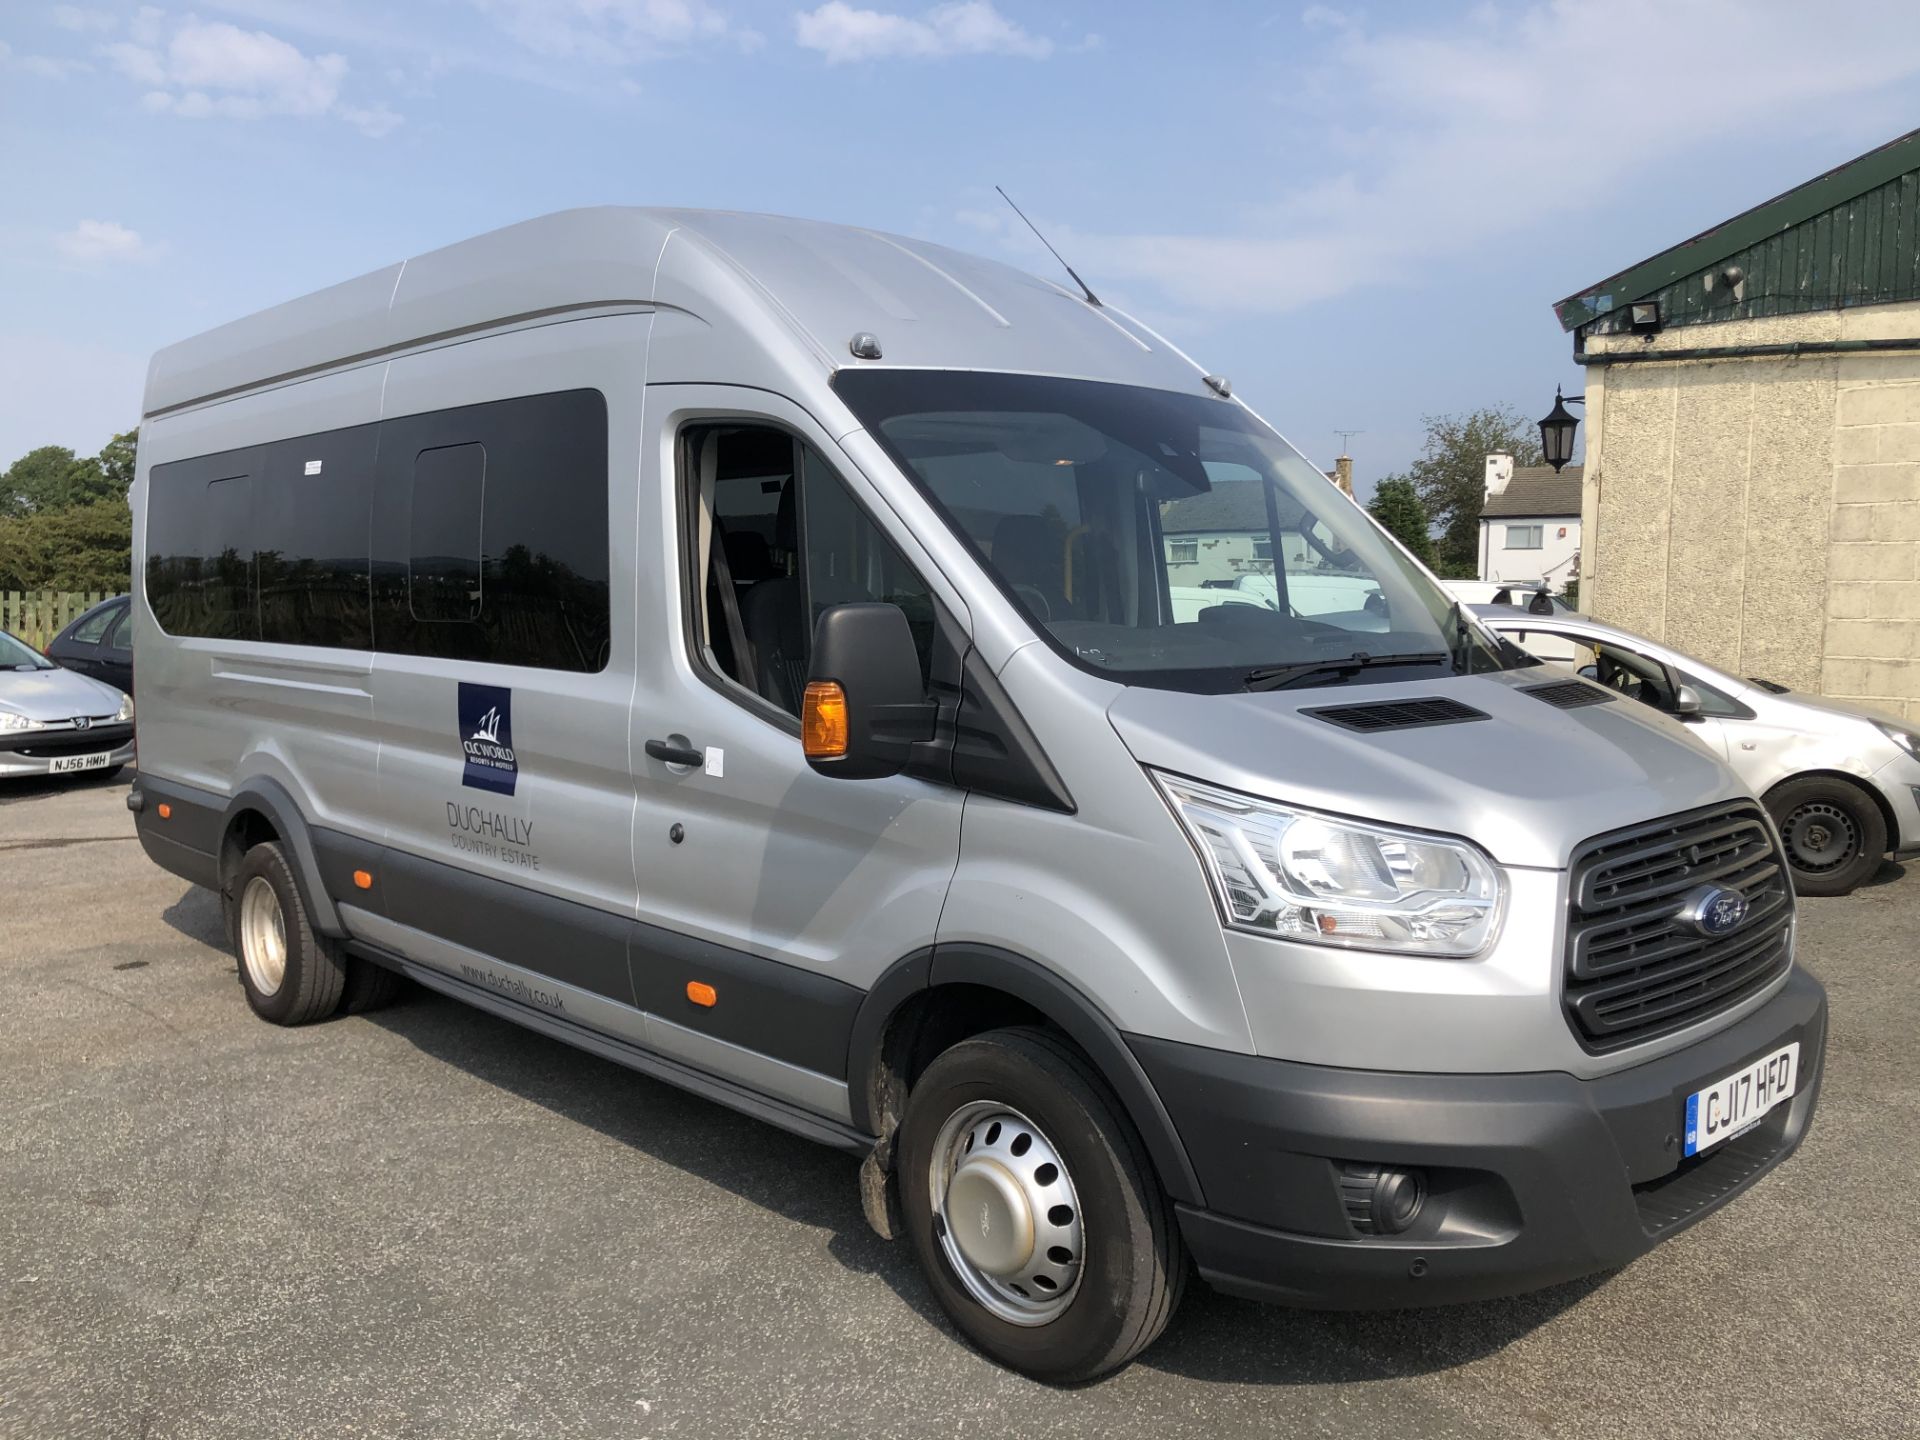 2017/17 REG FORD TRANSIT 460 TREND ECONETIC 2.2 DIESEL 17 SEAT MINIBUS, SHOWING 0 FORMER KEEPERS